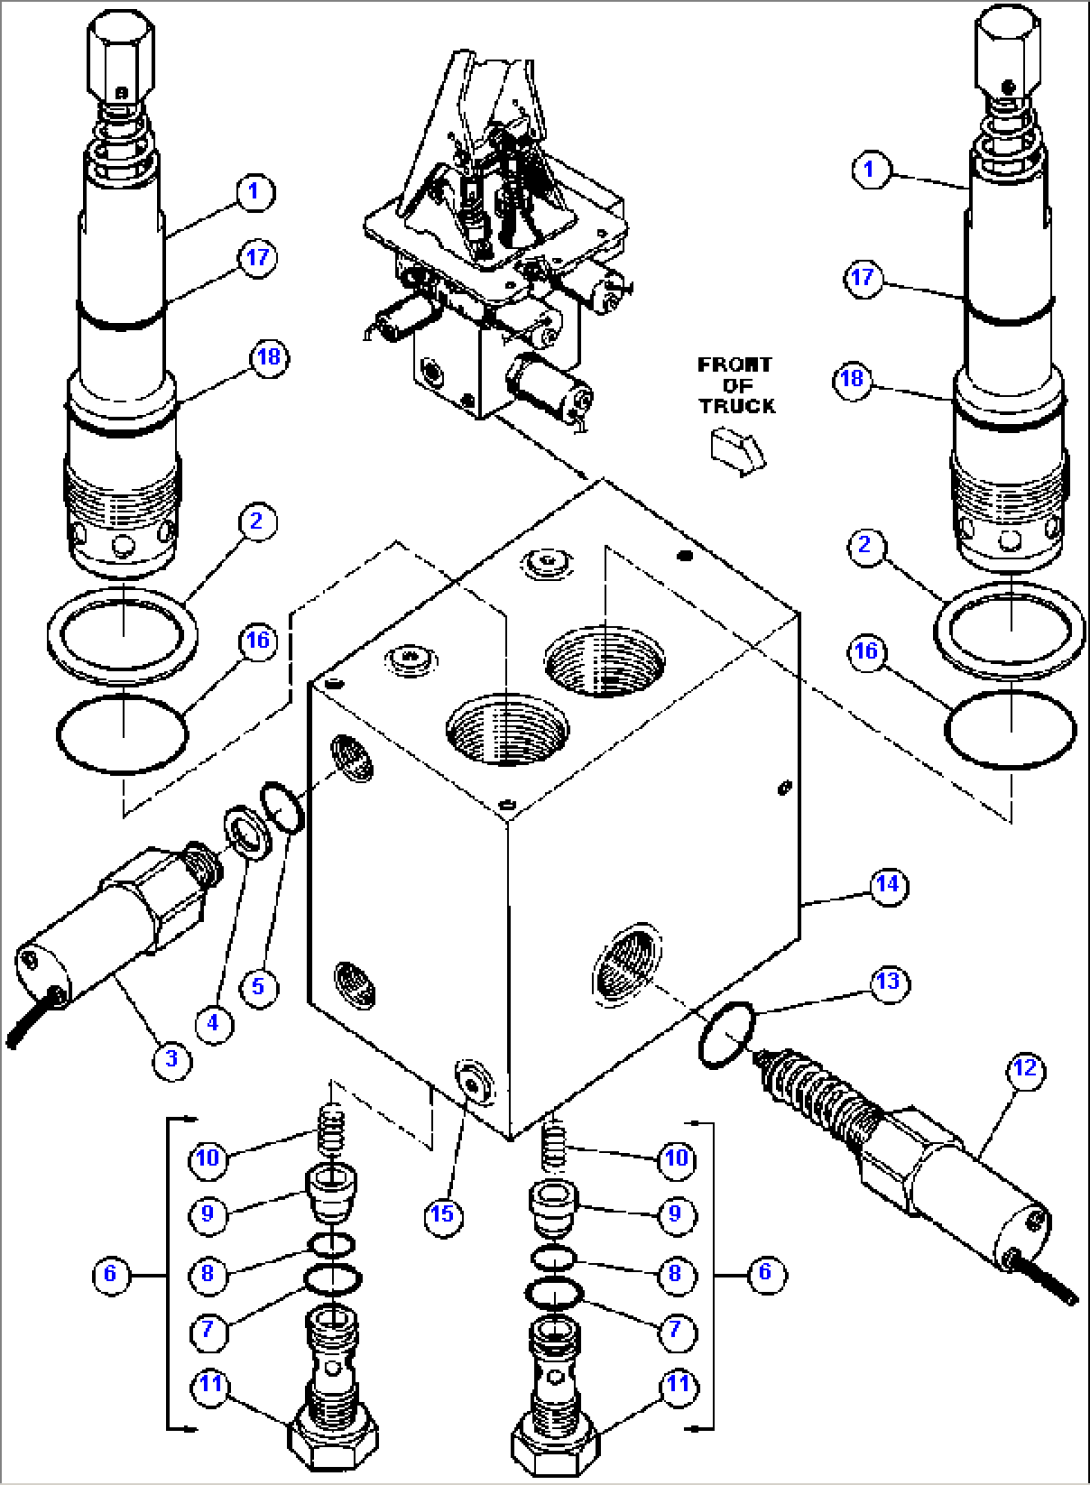 DUAL CONTROLLER SUB-ASSEMBLY (VE1249)